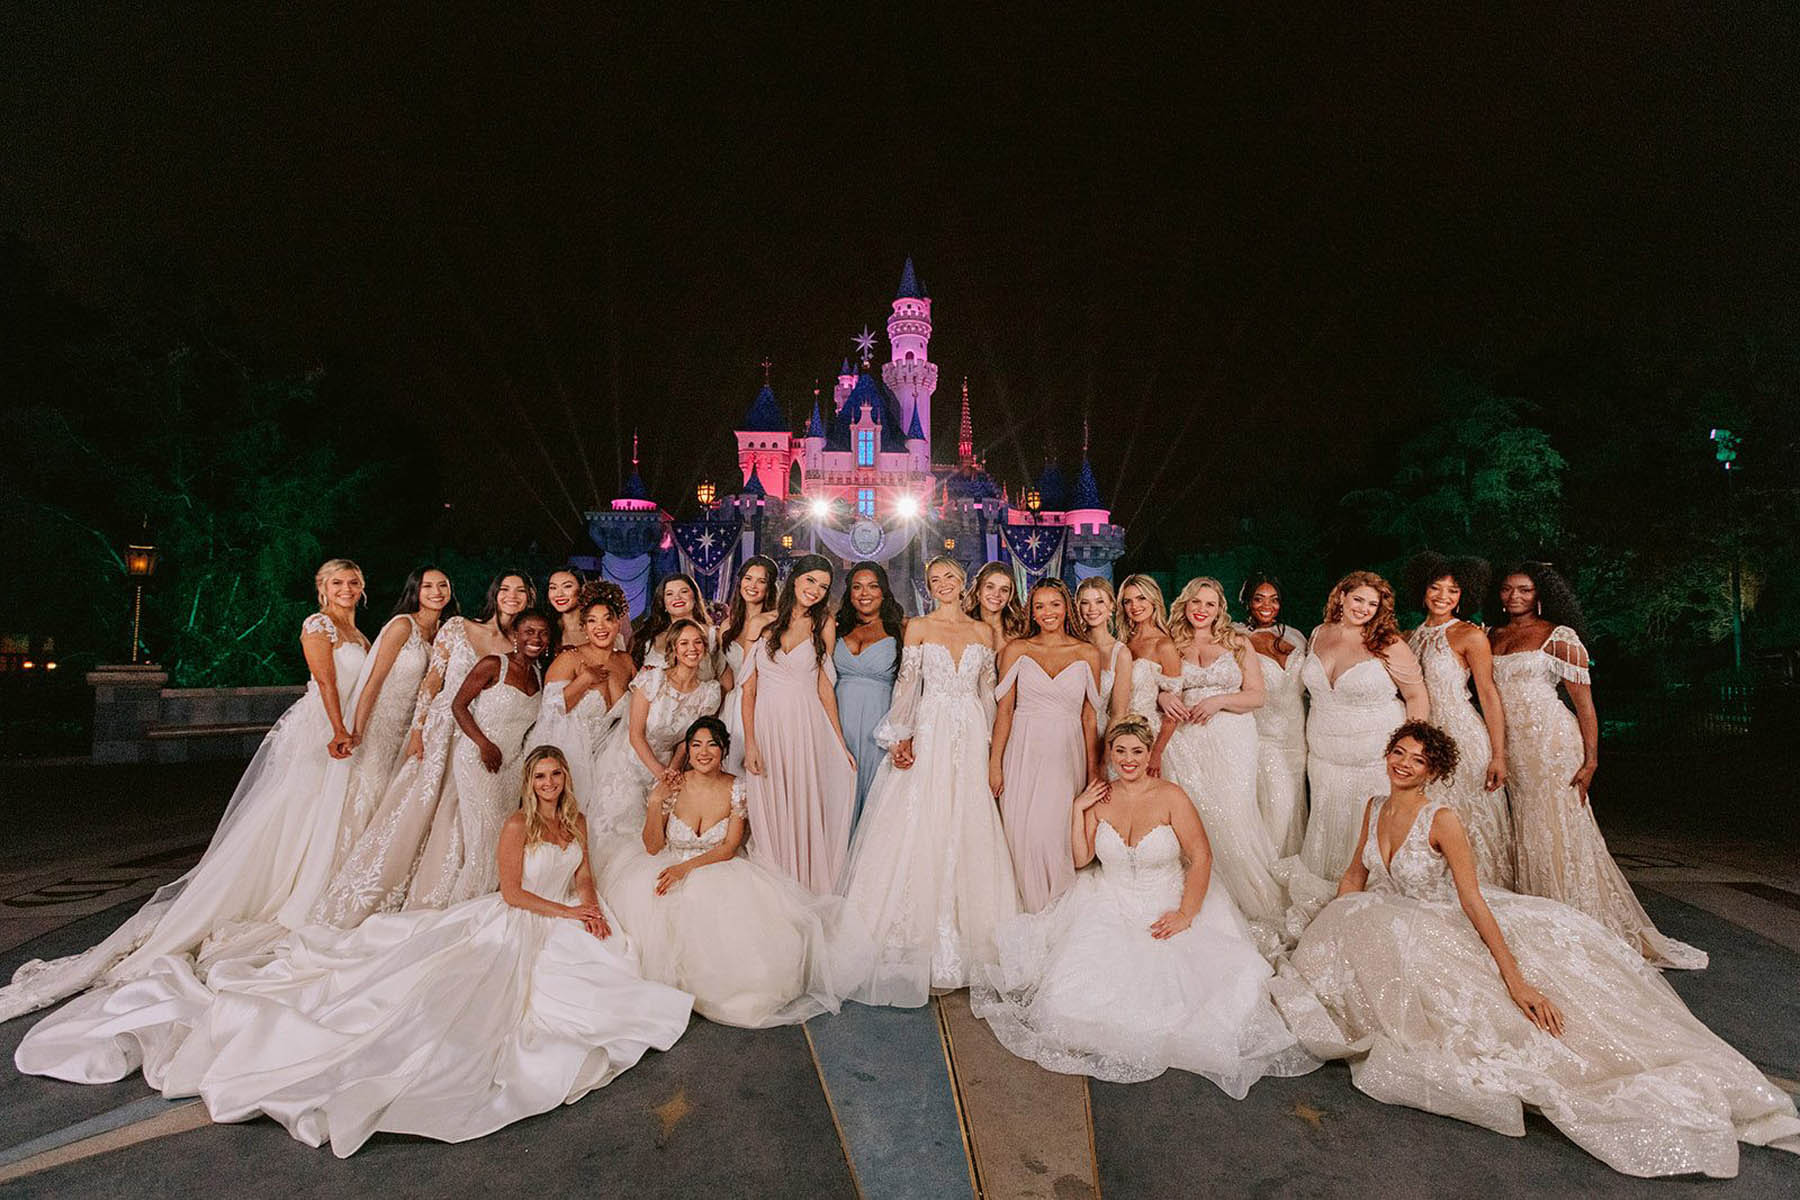 A large group of people in princess-inspired gowns poses in front of Sleeping Beauty's castle.